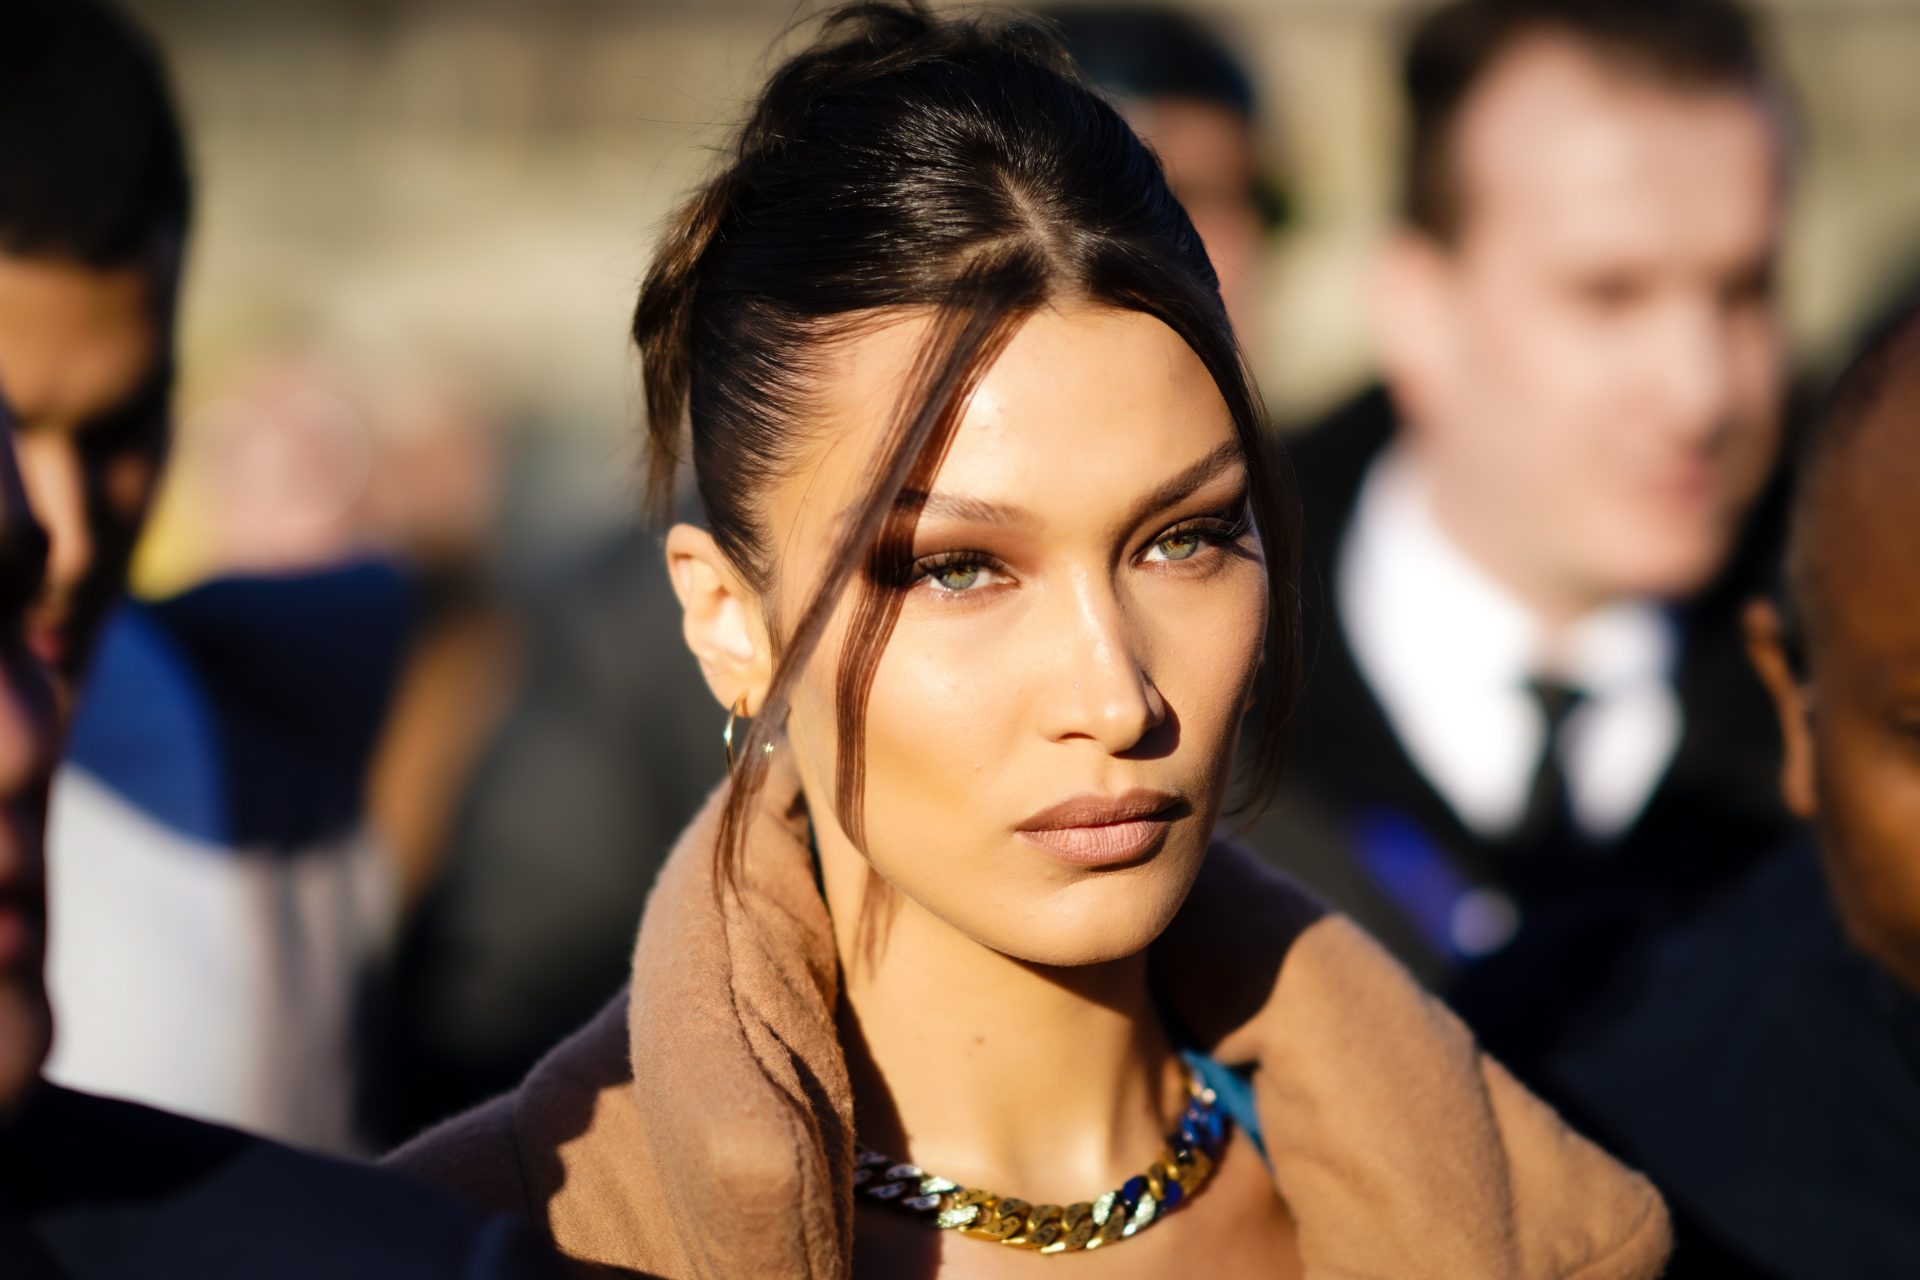 <p>Bella Hadid, the sister of Gigi, couldn't be left out. Born in 1997, she teamed up with the renowned IMG Models in 2014, embarking on a journey that transformed her into one of the highest-paid models over a decade.</p> <p>Net worth: $25 million</p>